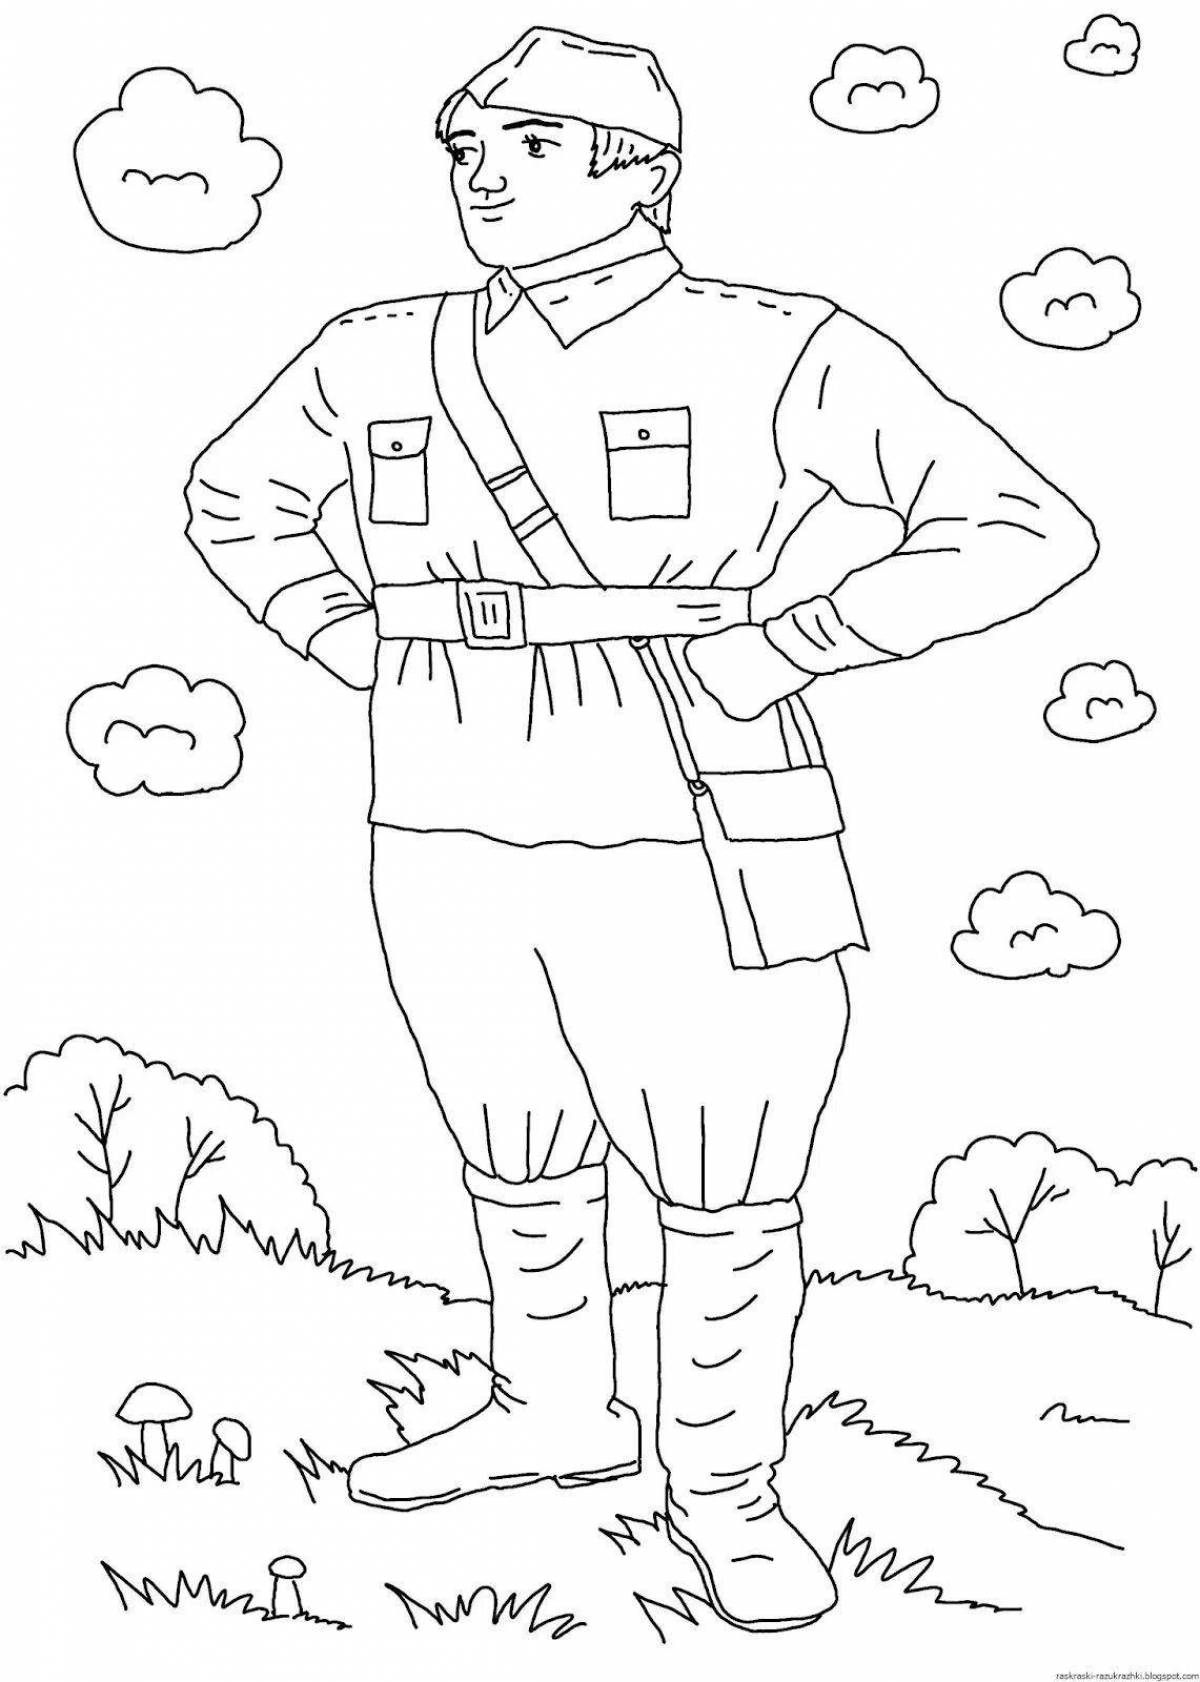 Tempting military profession coloring book for preschoolers